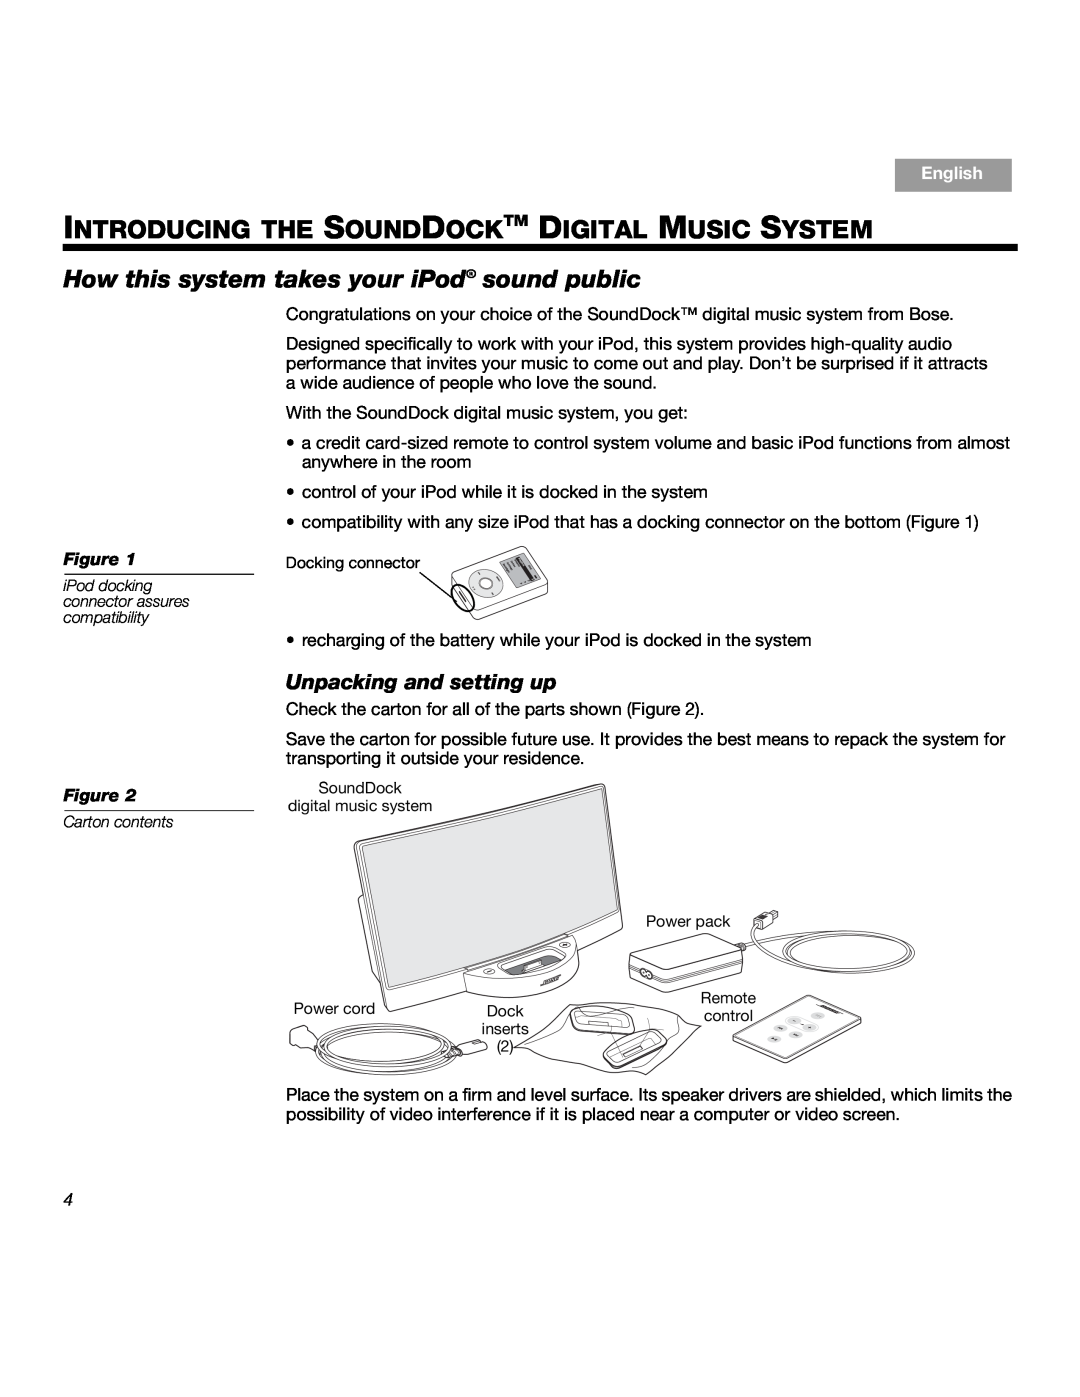 Bose SOUNDDOCKTM Introducing The Sounddocktm Digital Music System, How this system takes your iPodŠ sound public, Figure 